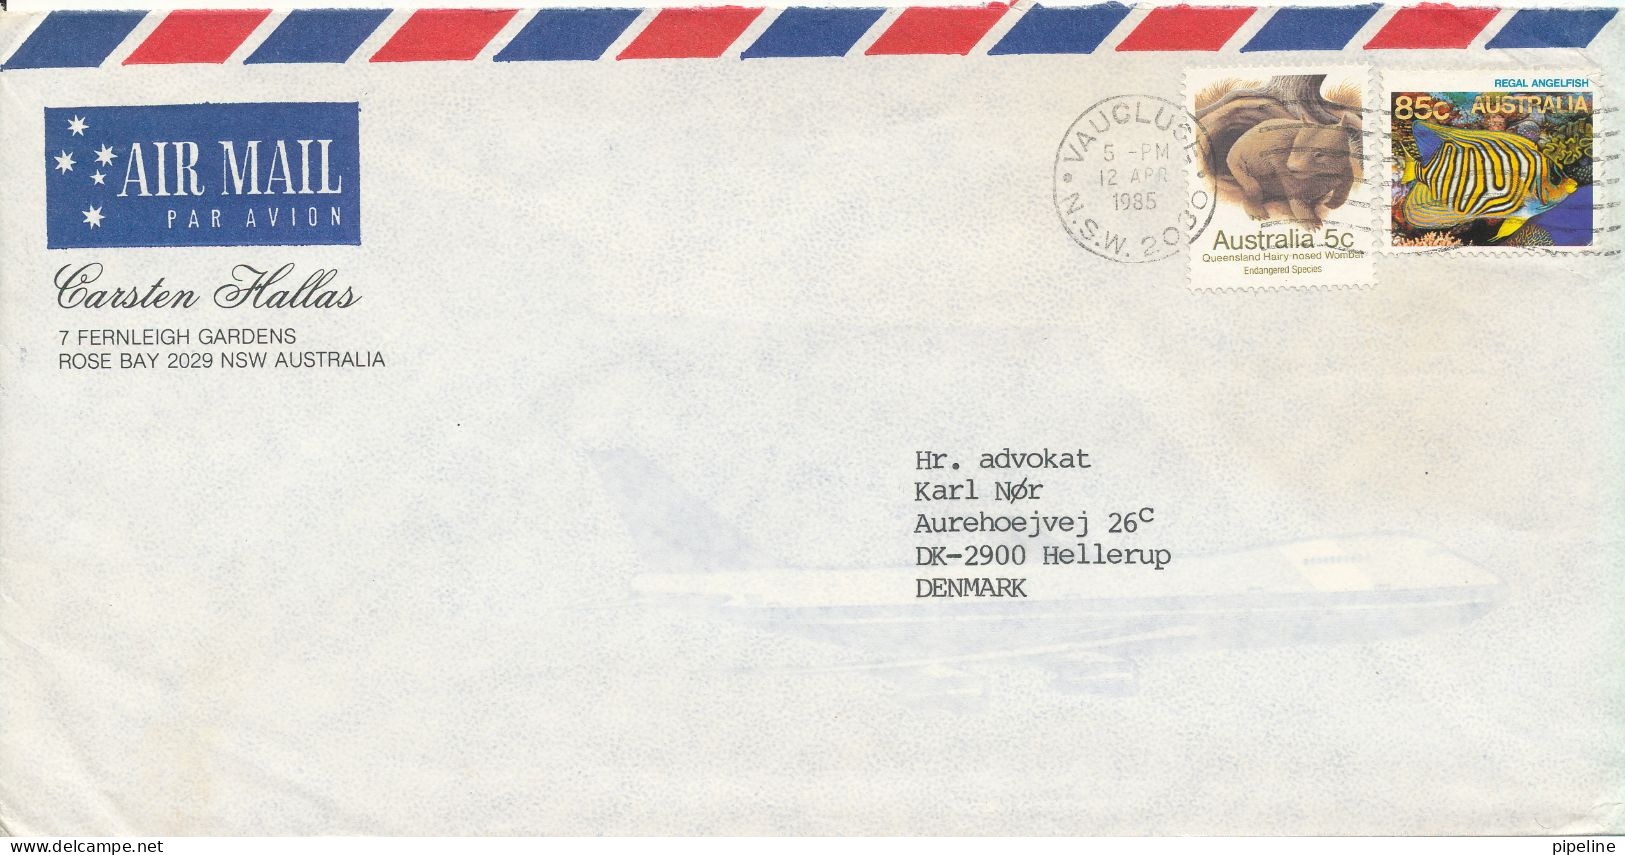 Australia Air Mail Cover Sent To Denmark Vaucluce 12-4-1985 - Covers & Documents